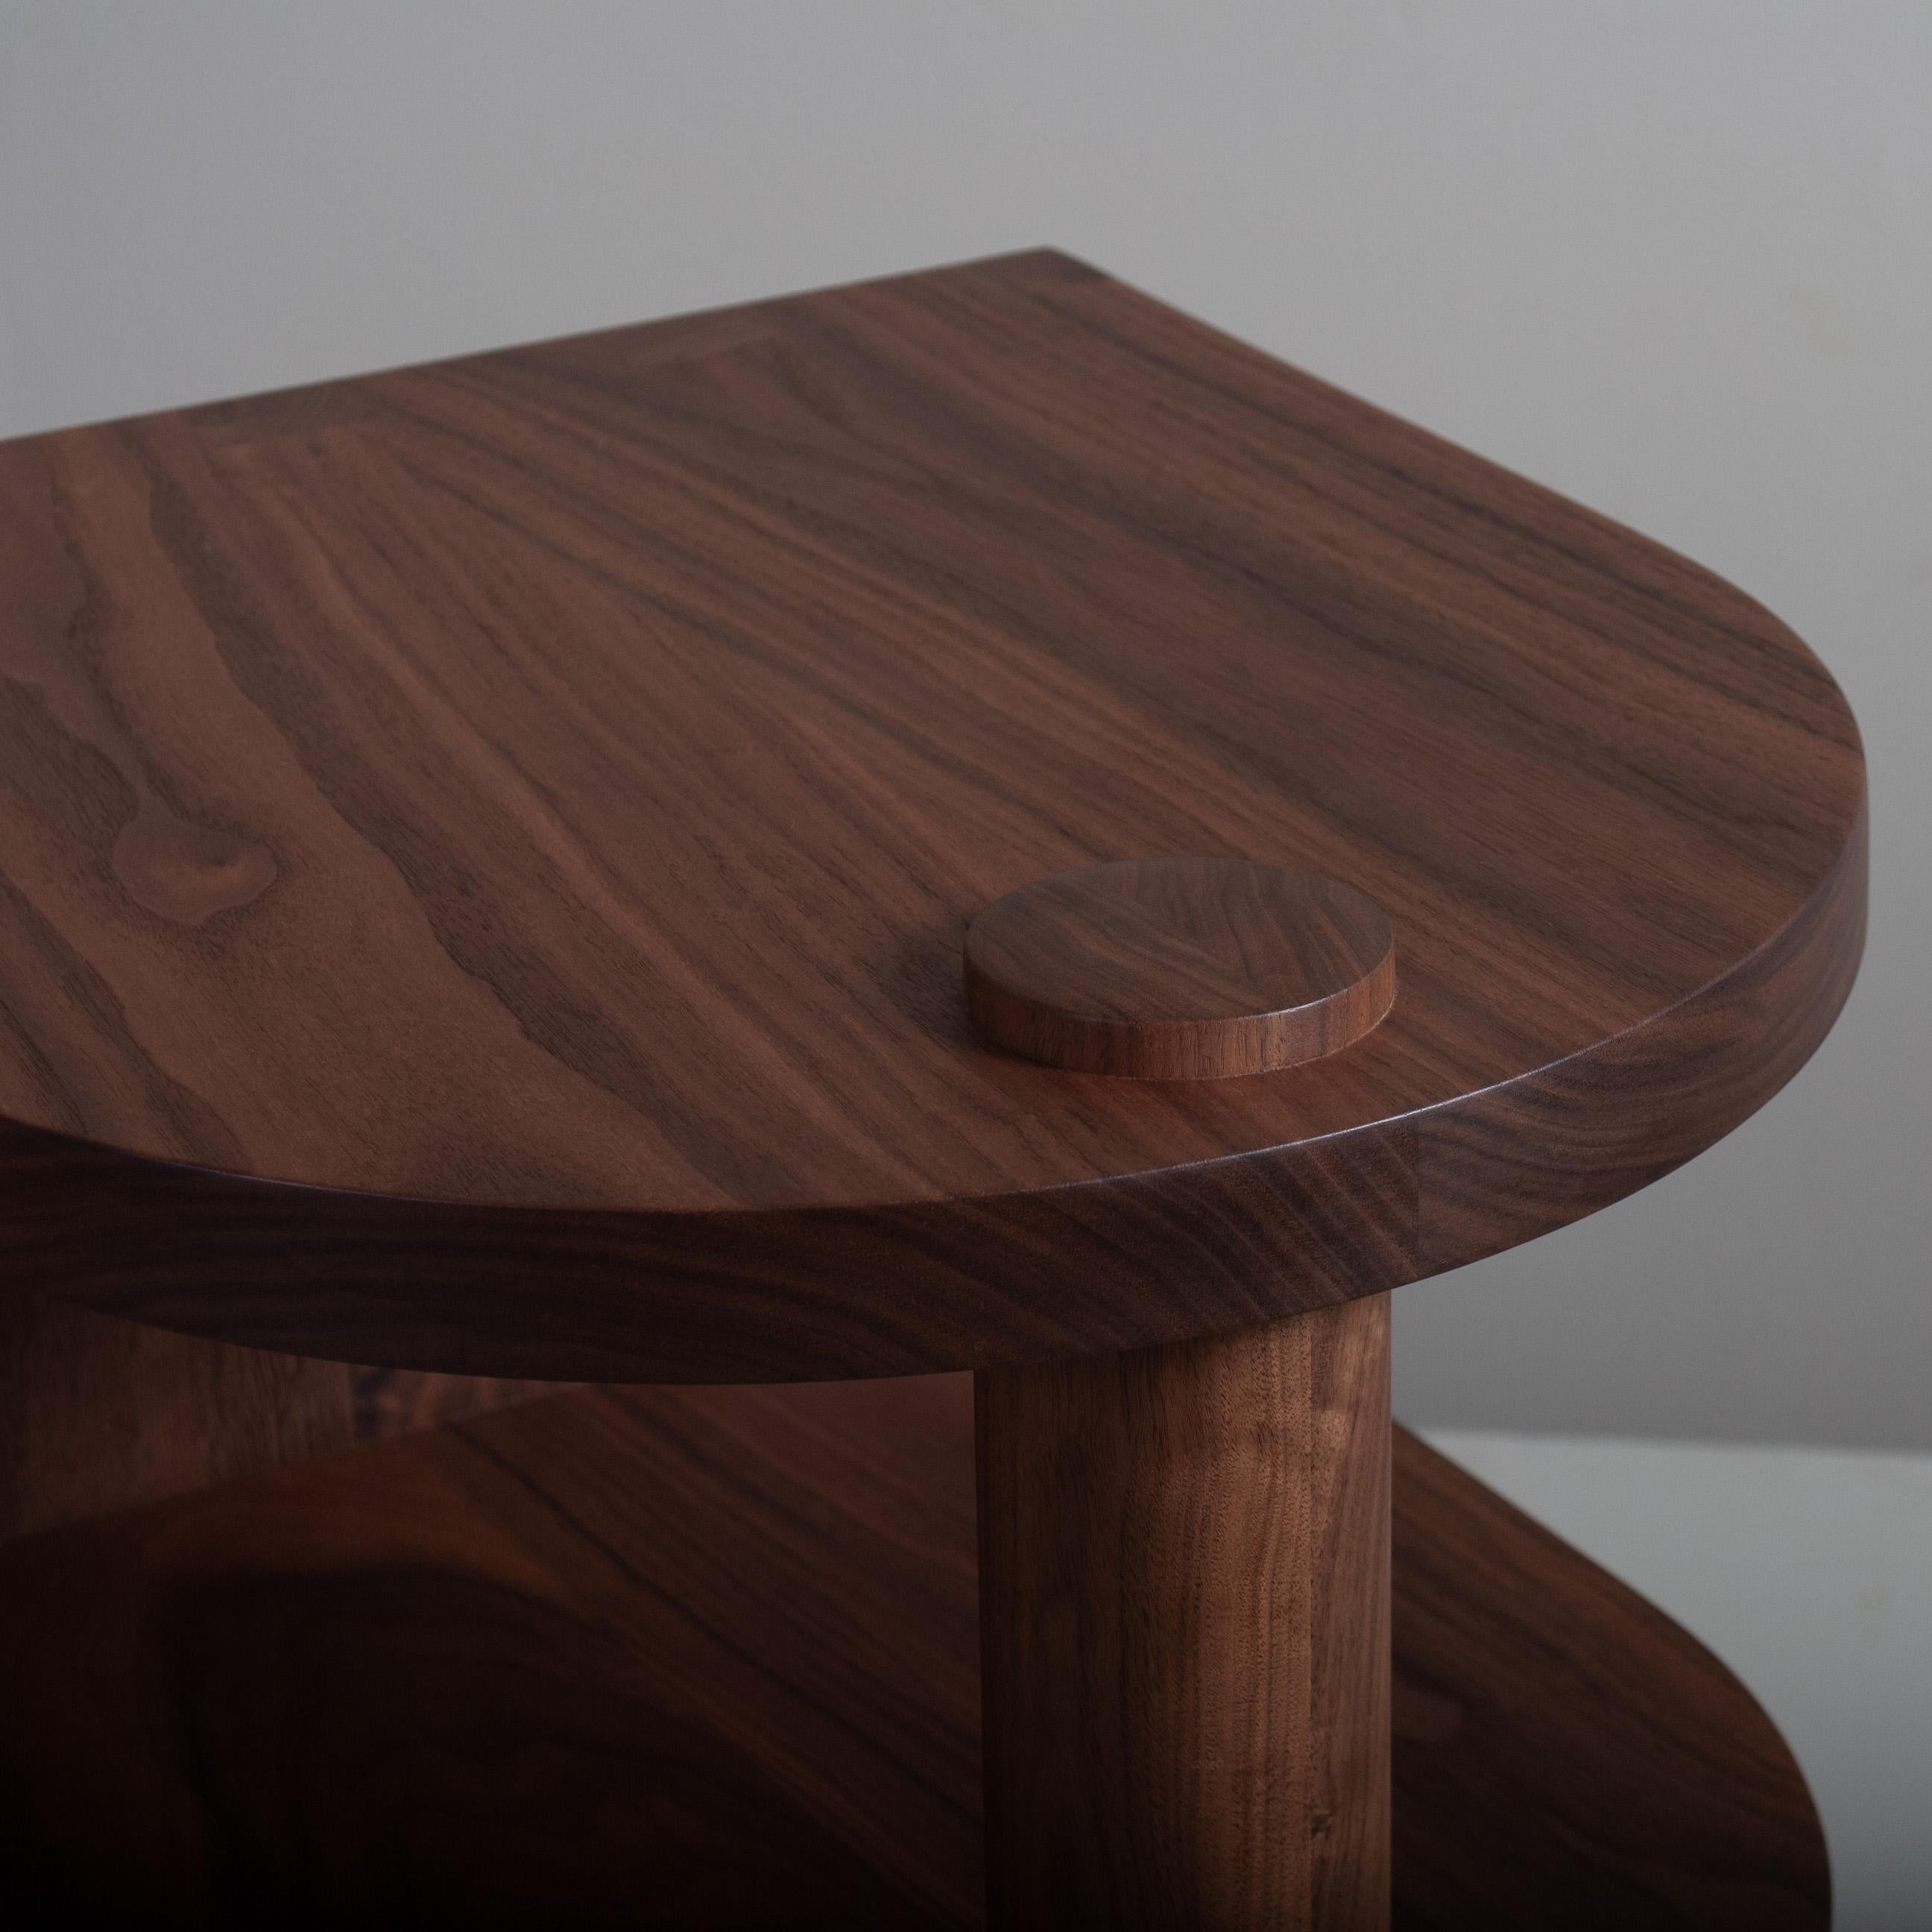 Hand-Crafted Architectural Handcrafted Walnut End Table For Sale